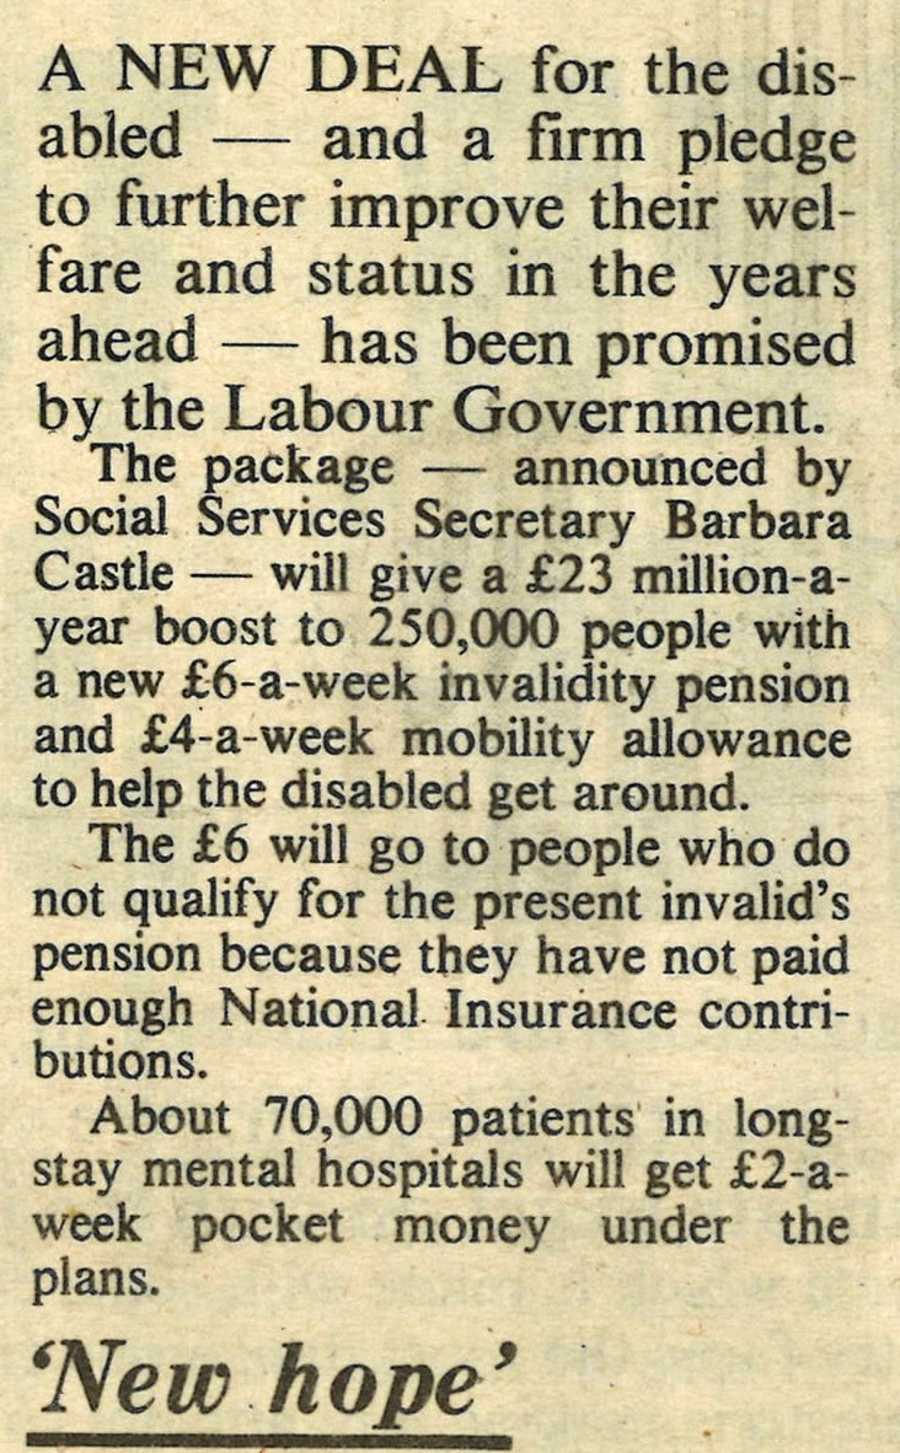 An extract from Labour Weekly, 20 September 1974